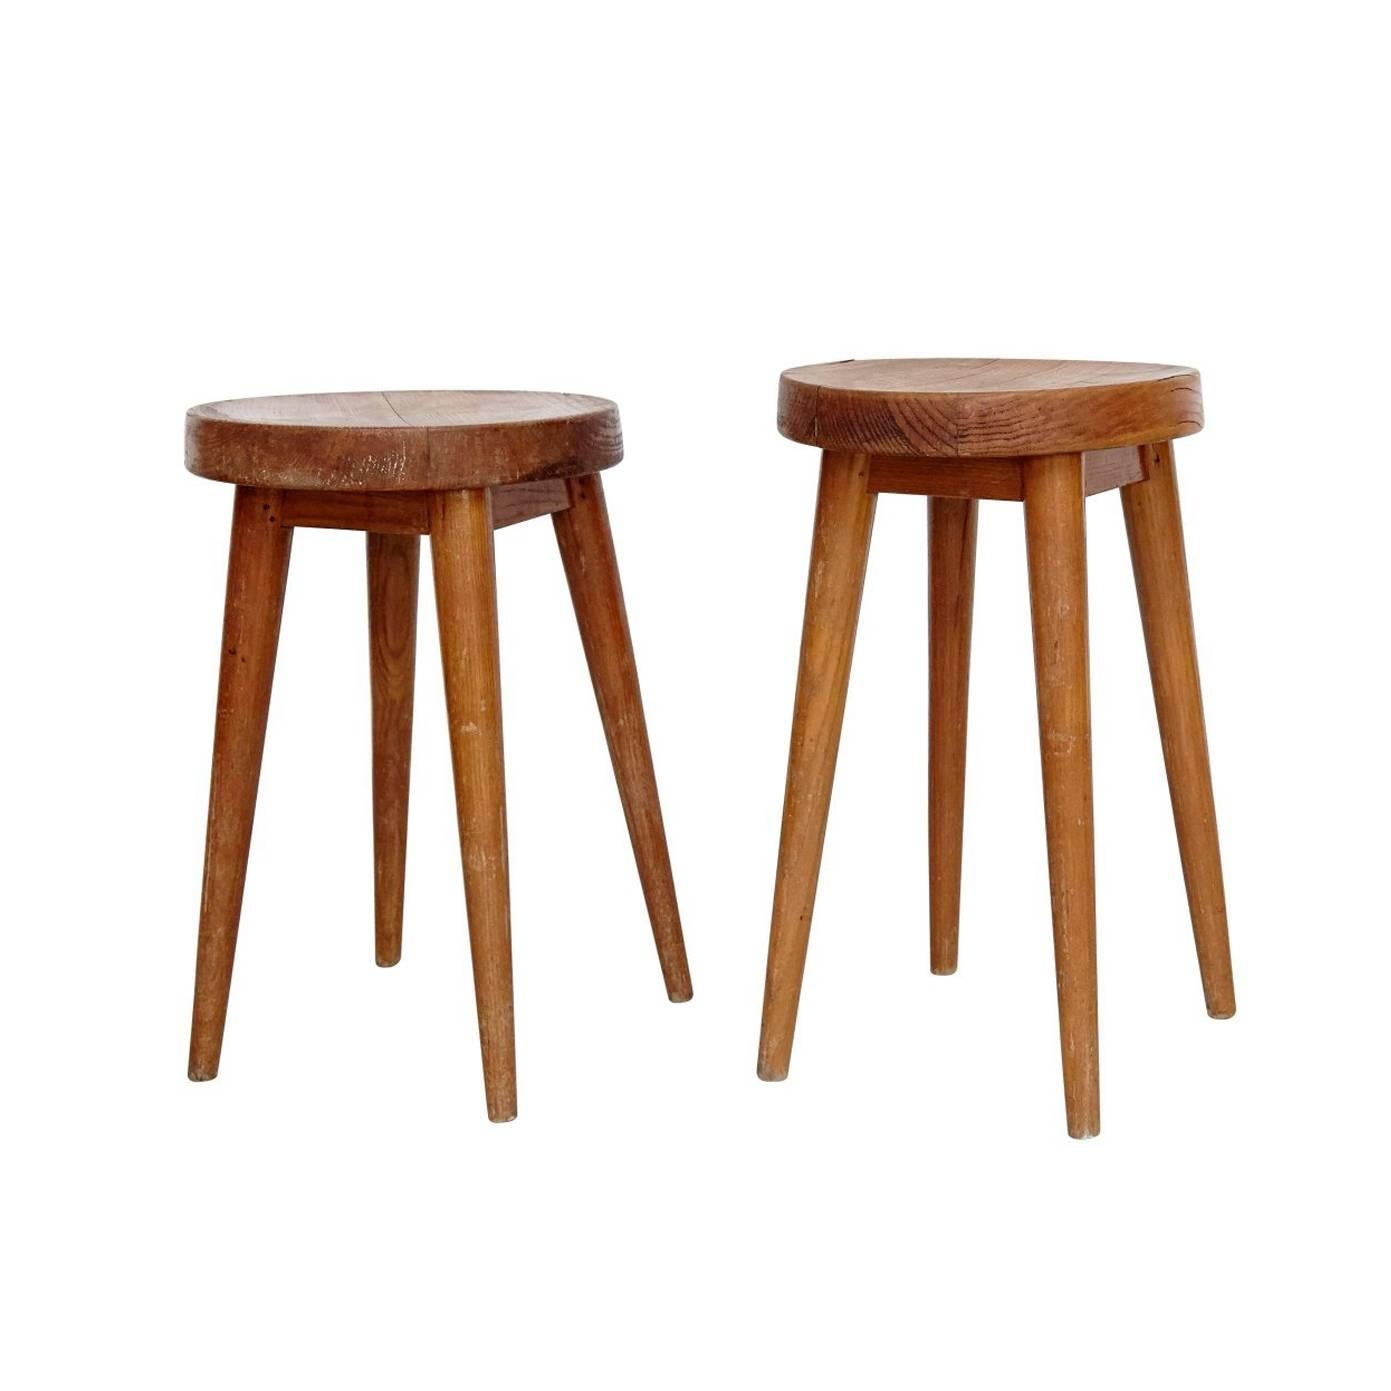 Set of Two Pierre Jeanneret & Charlotte Perriand Stools